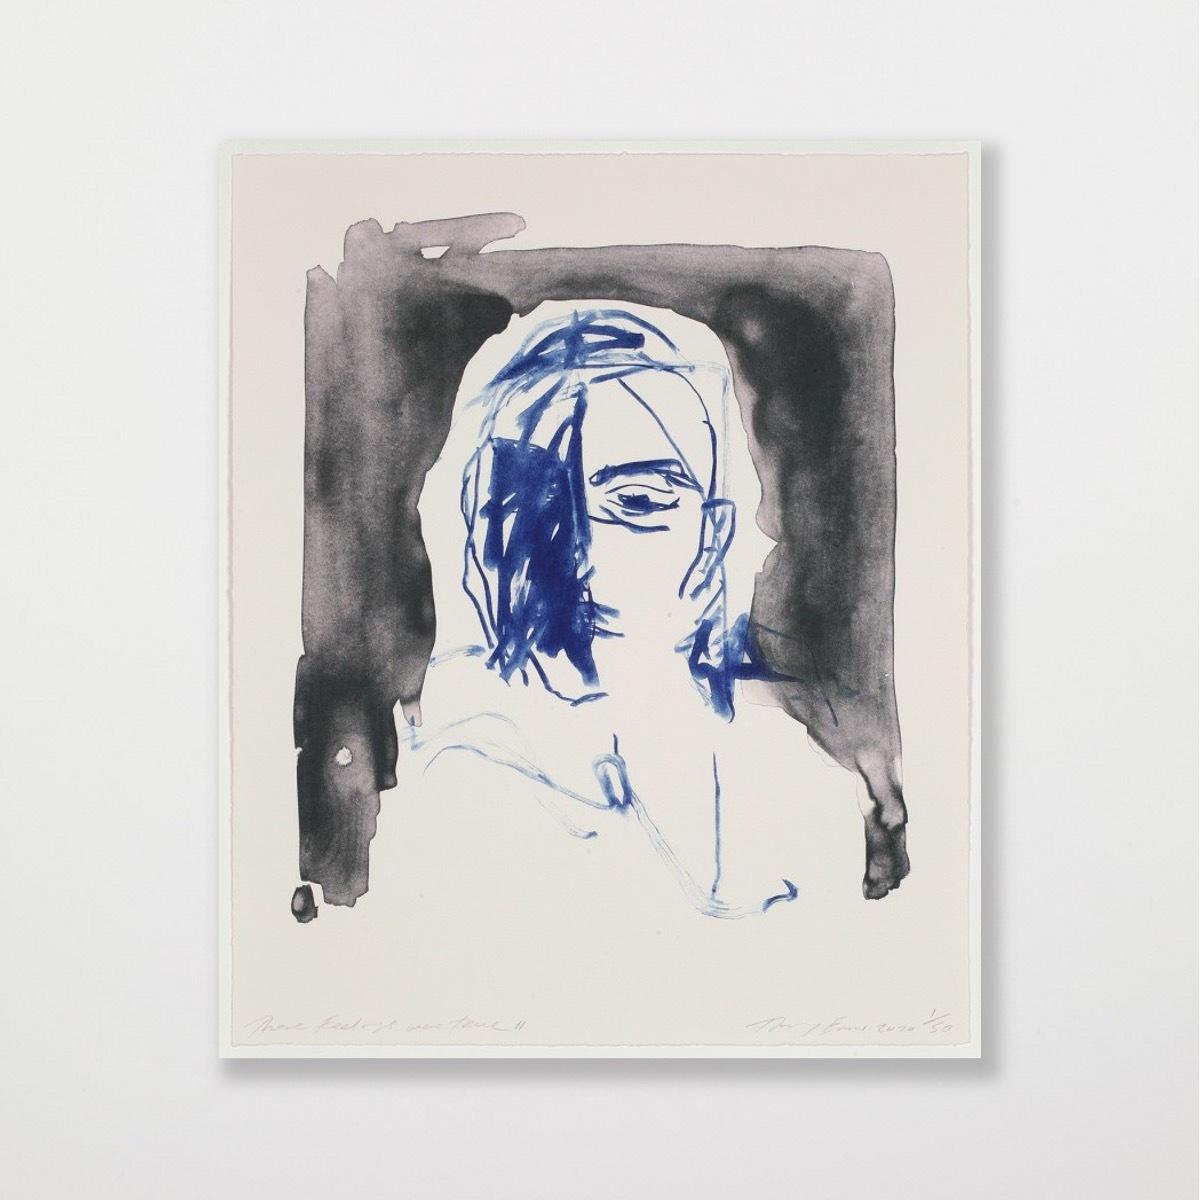 These Feelings Were True -Emin, Contemporary, YBAs, Lithograph, Blue, Portrait For Sale 5